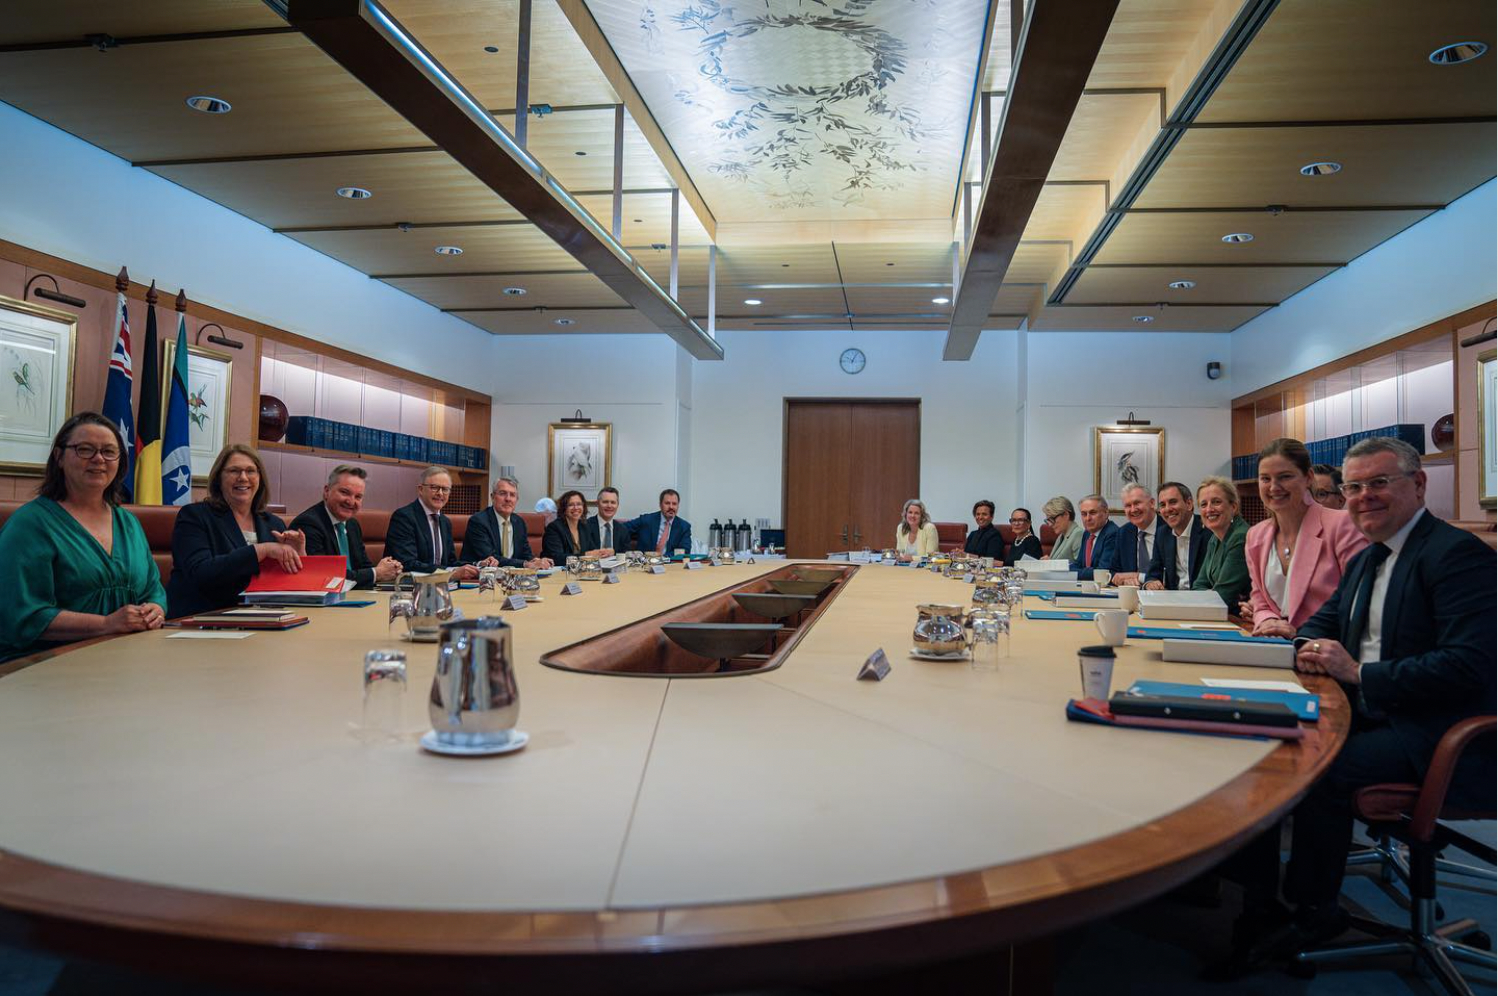 A photo of Anthony Albanese's cabinet posing for a photo around a large oval table